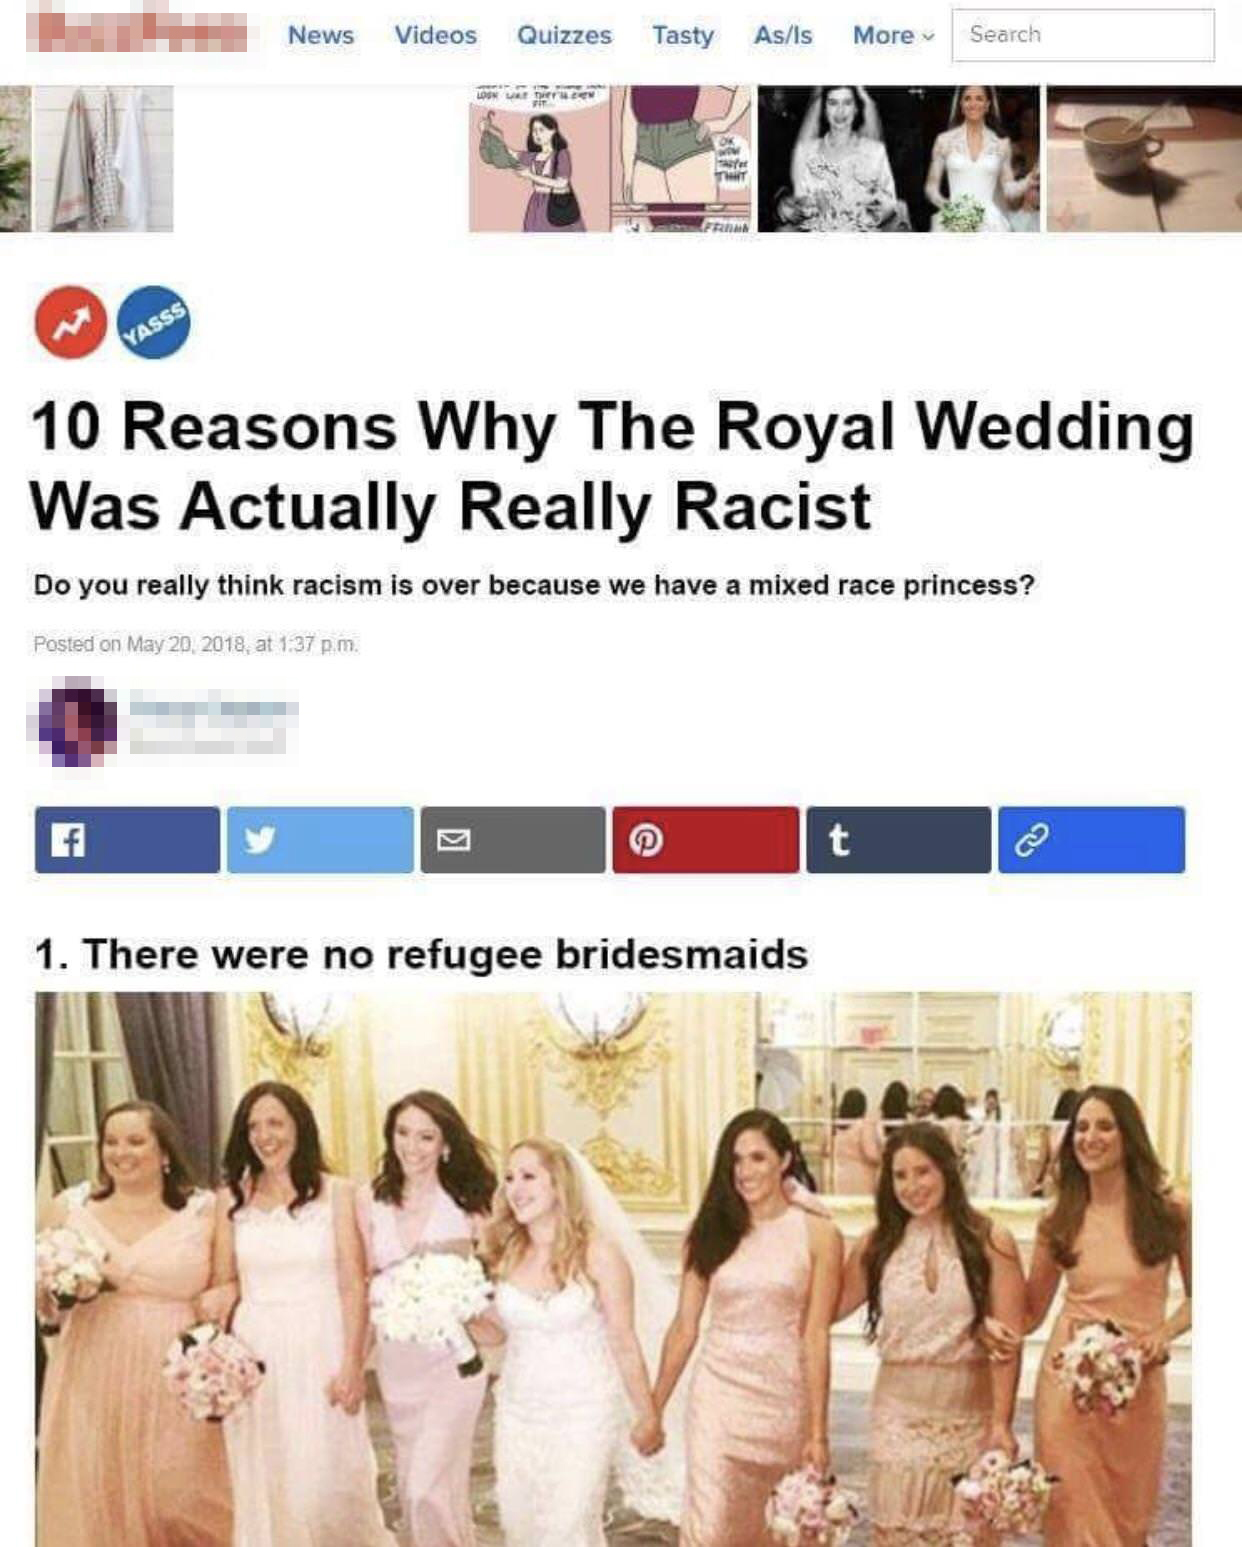 10 reasons why the royal wedding was actually really racist - News Videos Quizzes Tasty Alls More Search 10 Reasons Why The Royal Wedding Was Actually Really Racist Do you really think racism is over because we have a mixed race princess? 1. There were no